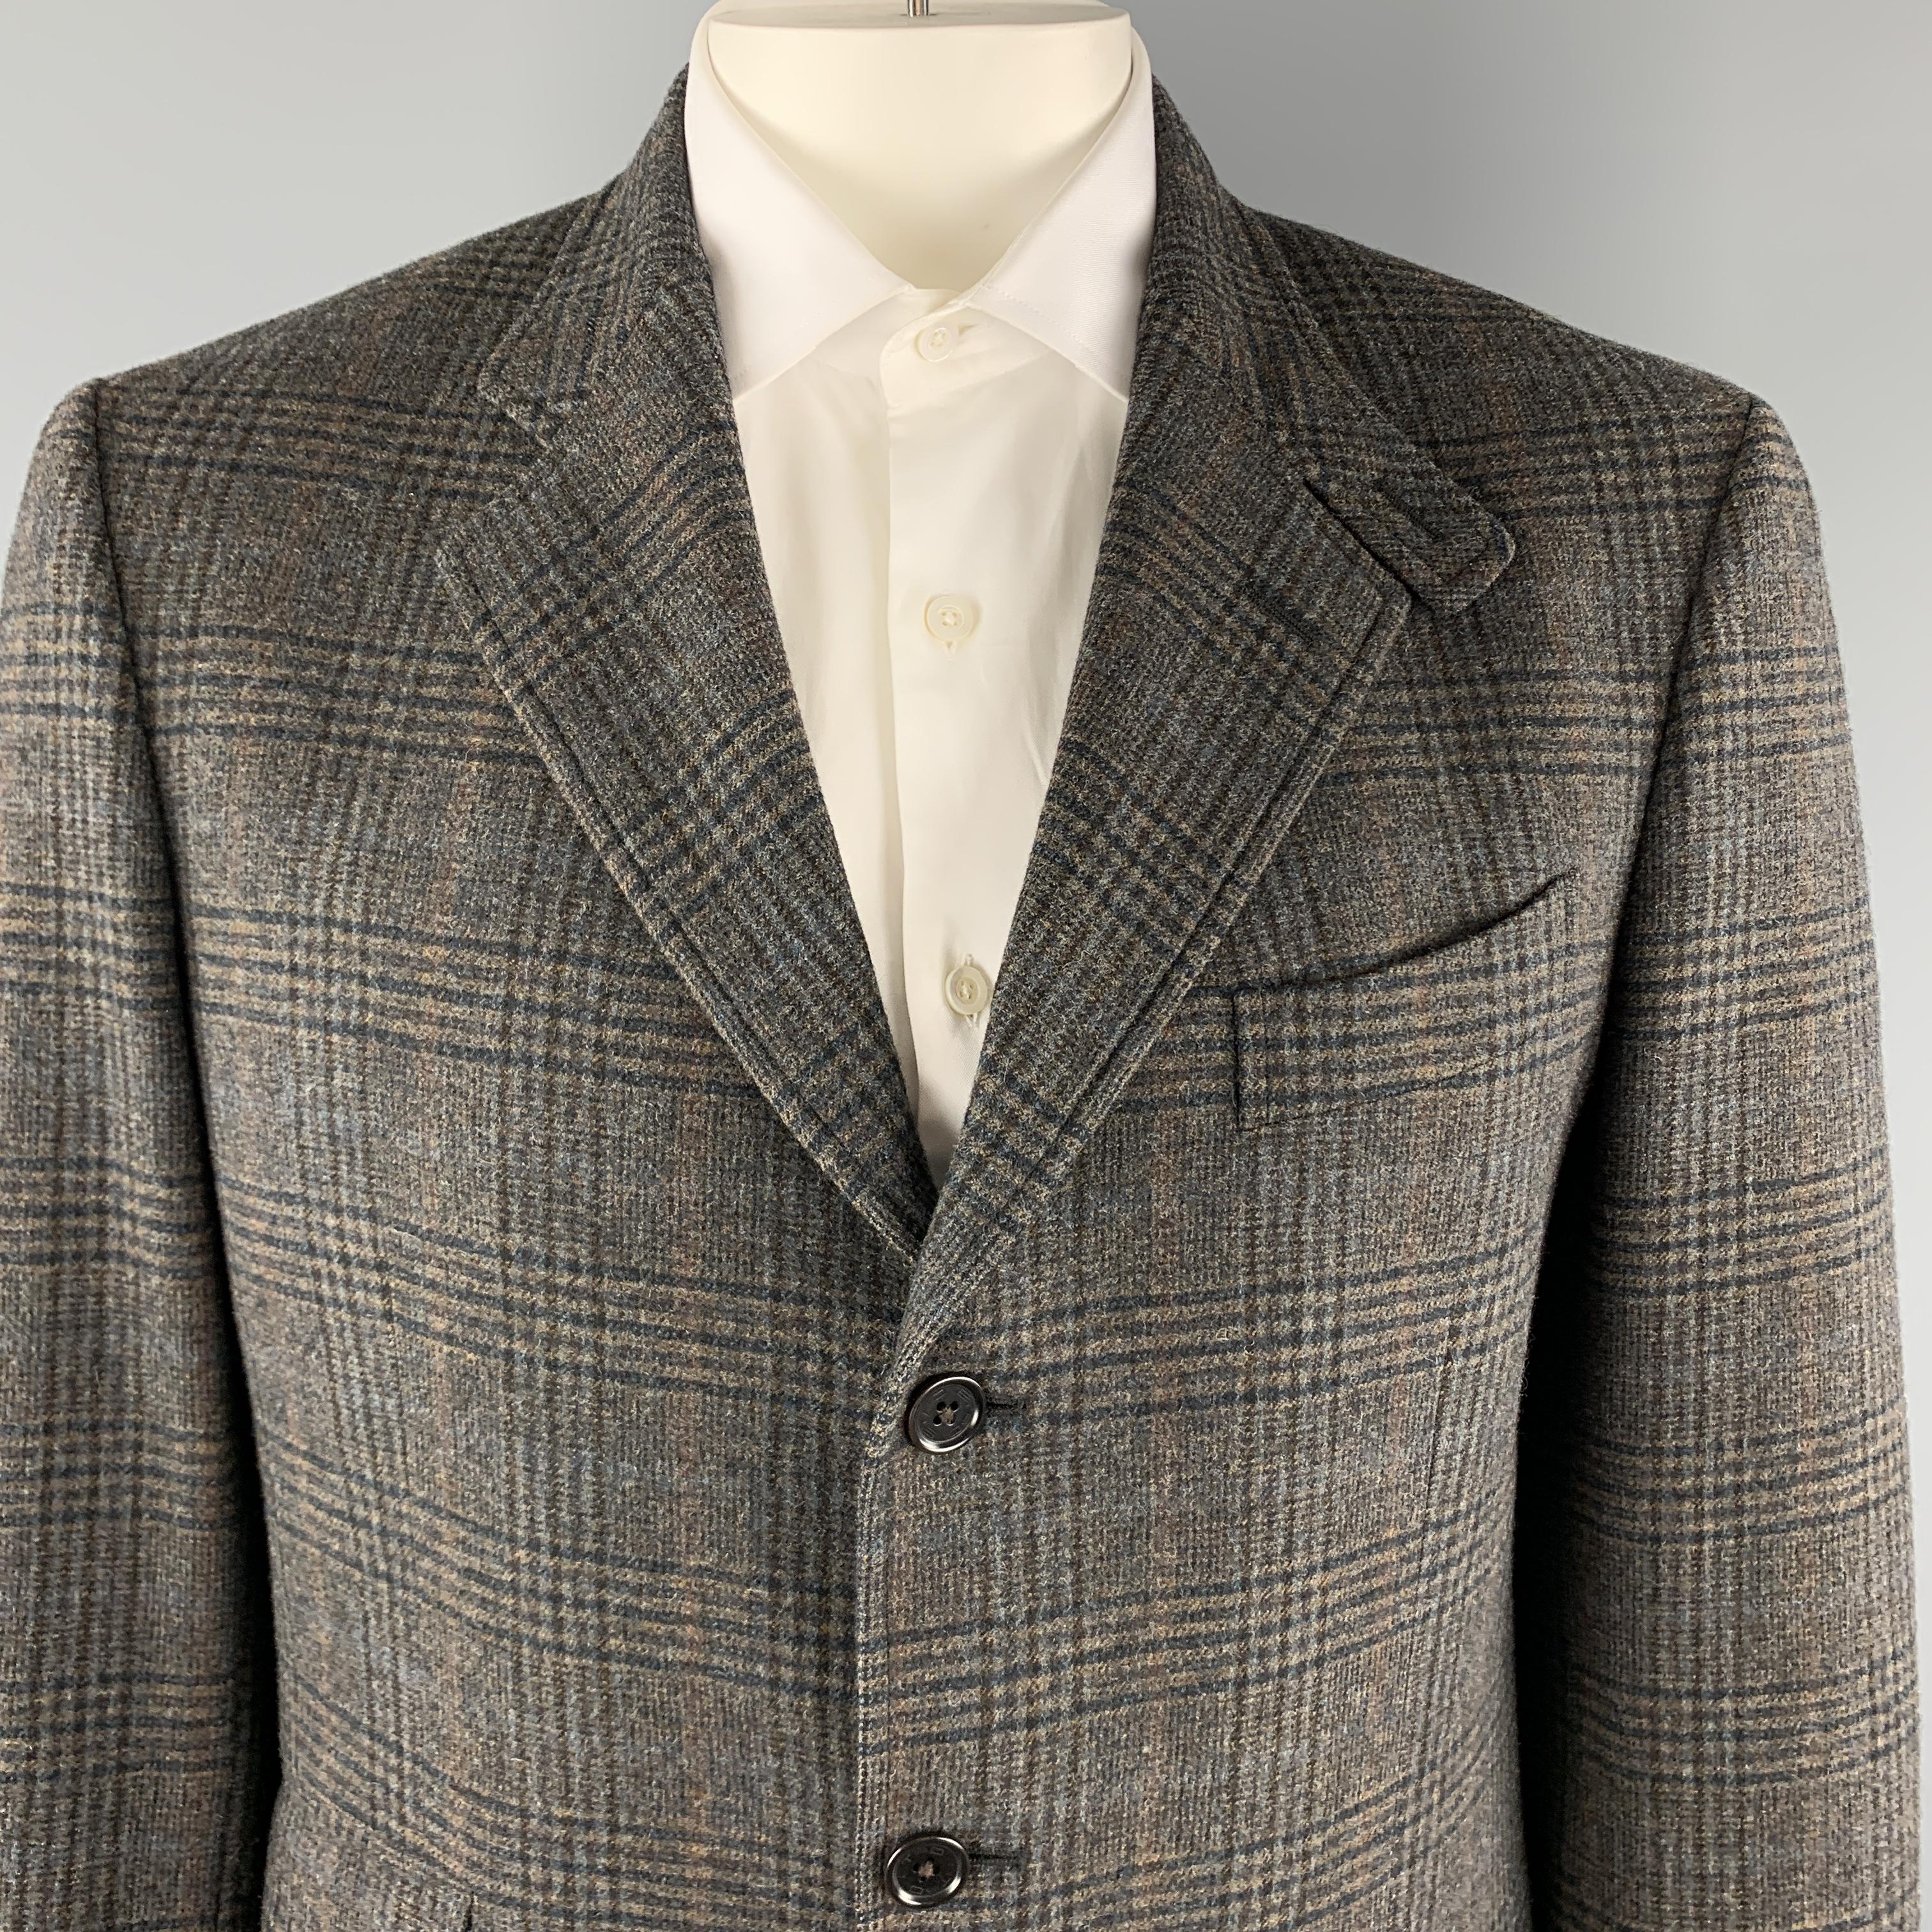 ETRO sport coat comes in a taupe wool cashmere blend with plaid pattern throughout in hues of blue and brown featuring a notch lapel, single breasted, three button front, and purple paisley lined tab collar. Made in Italy.

Excellent Pre-Owned